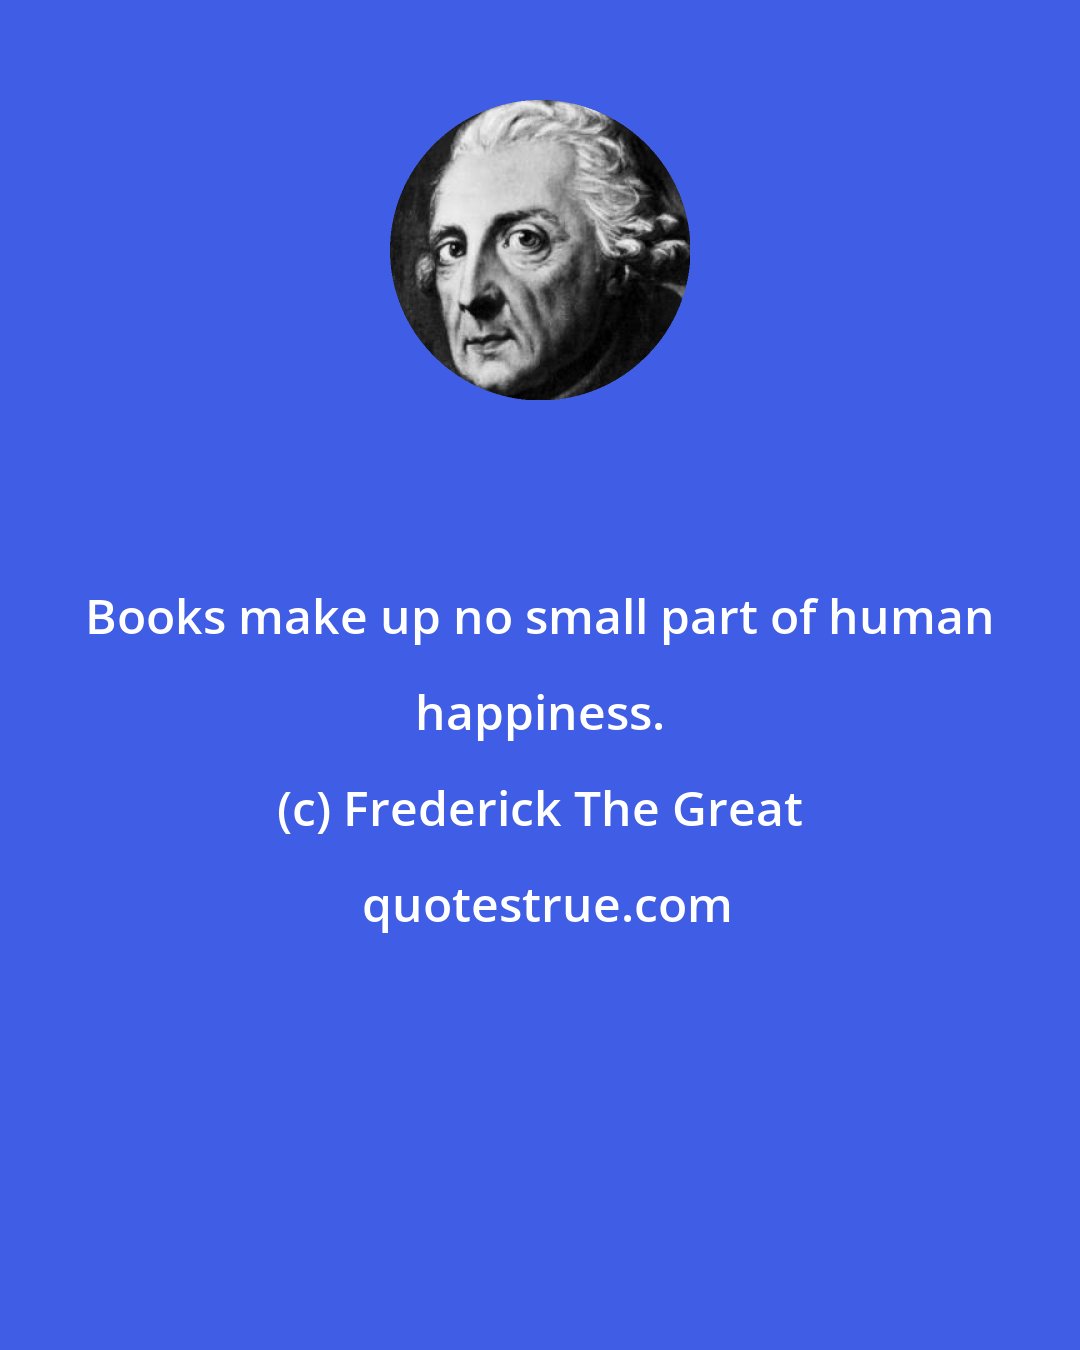 Frederick The Great: Books make up no small part of human happiness.